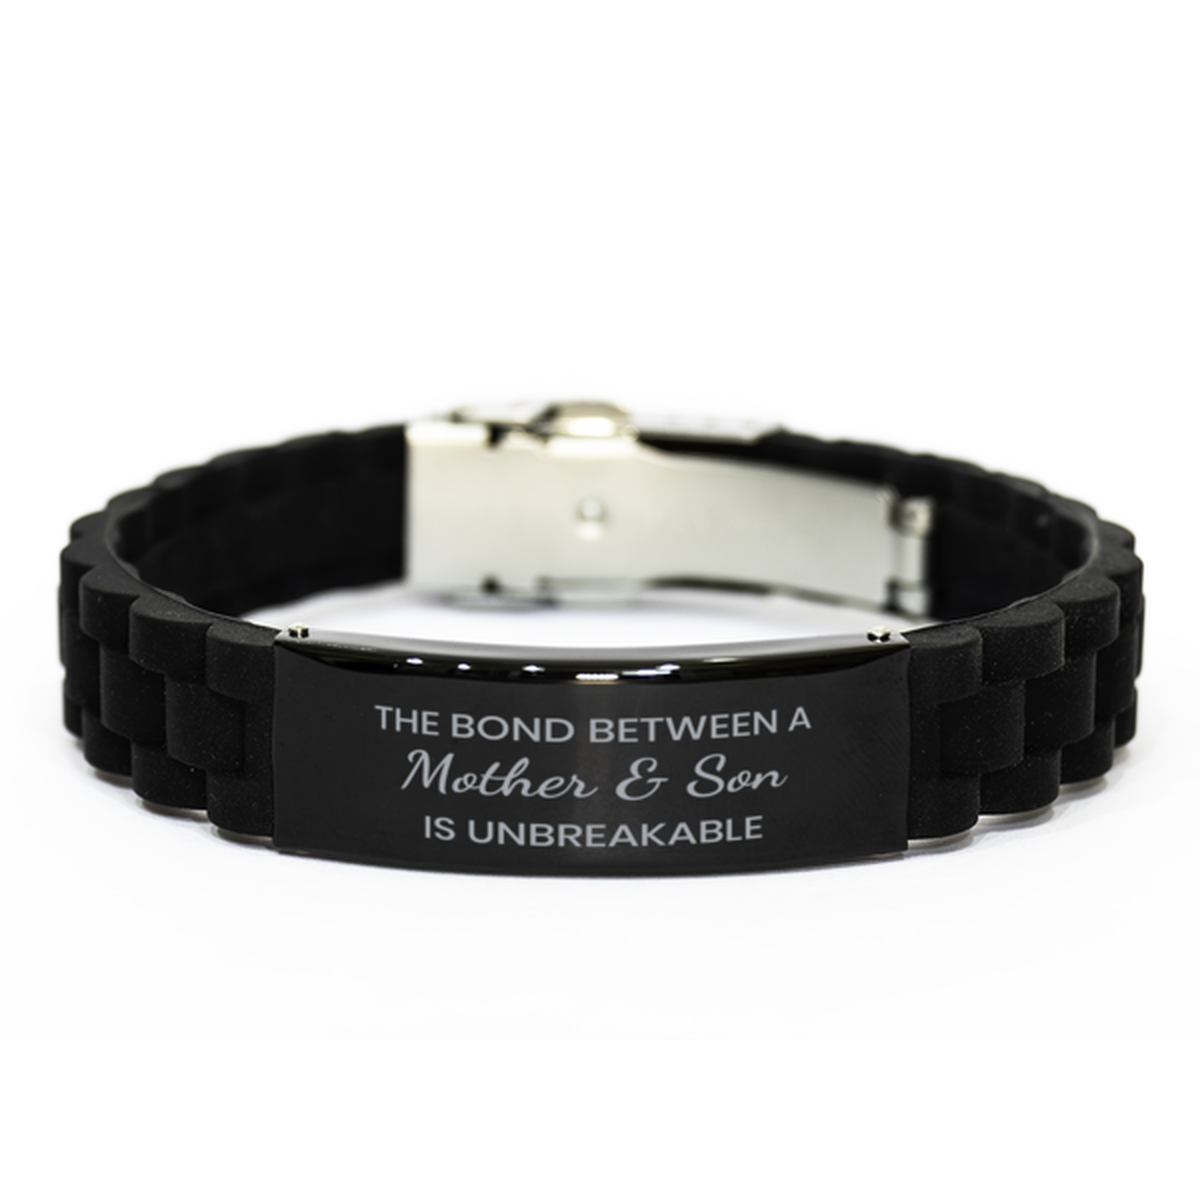 The Bond Between a Mother and Son is Unbreakable Bracelet, Mother Son Bracelet, Black Stainless Steel Silicone Bracelet, Christmas.